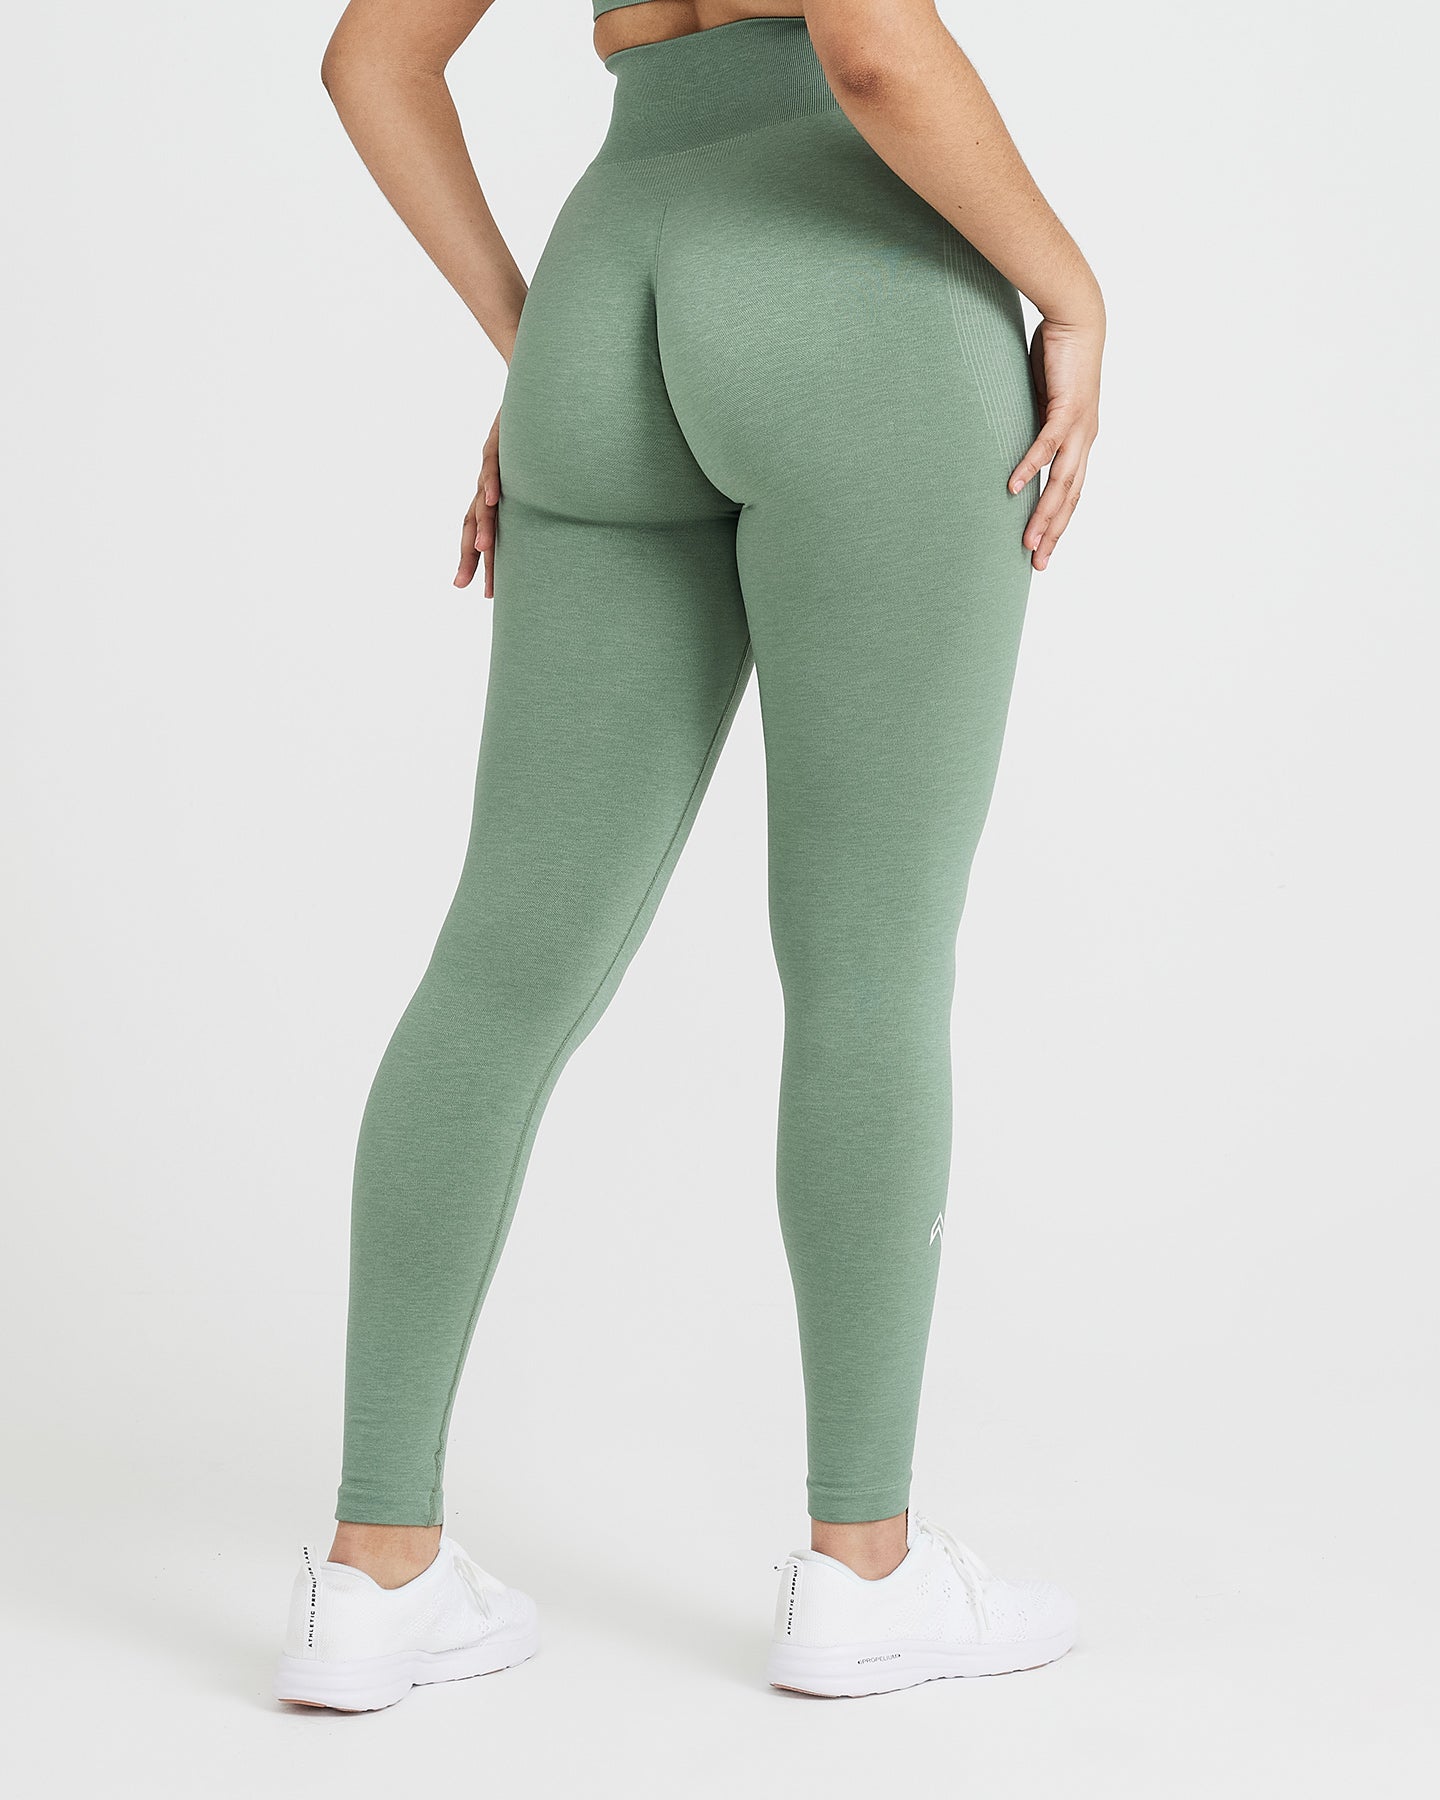 Betabrand Solid Green Leggings Size L (Petite) - 65% off